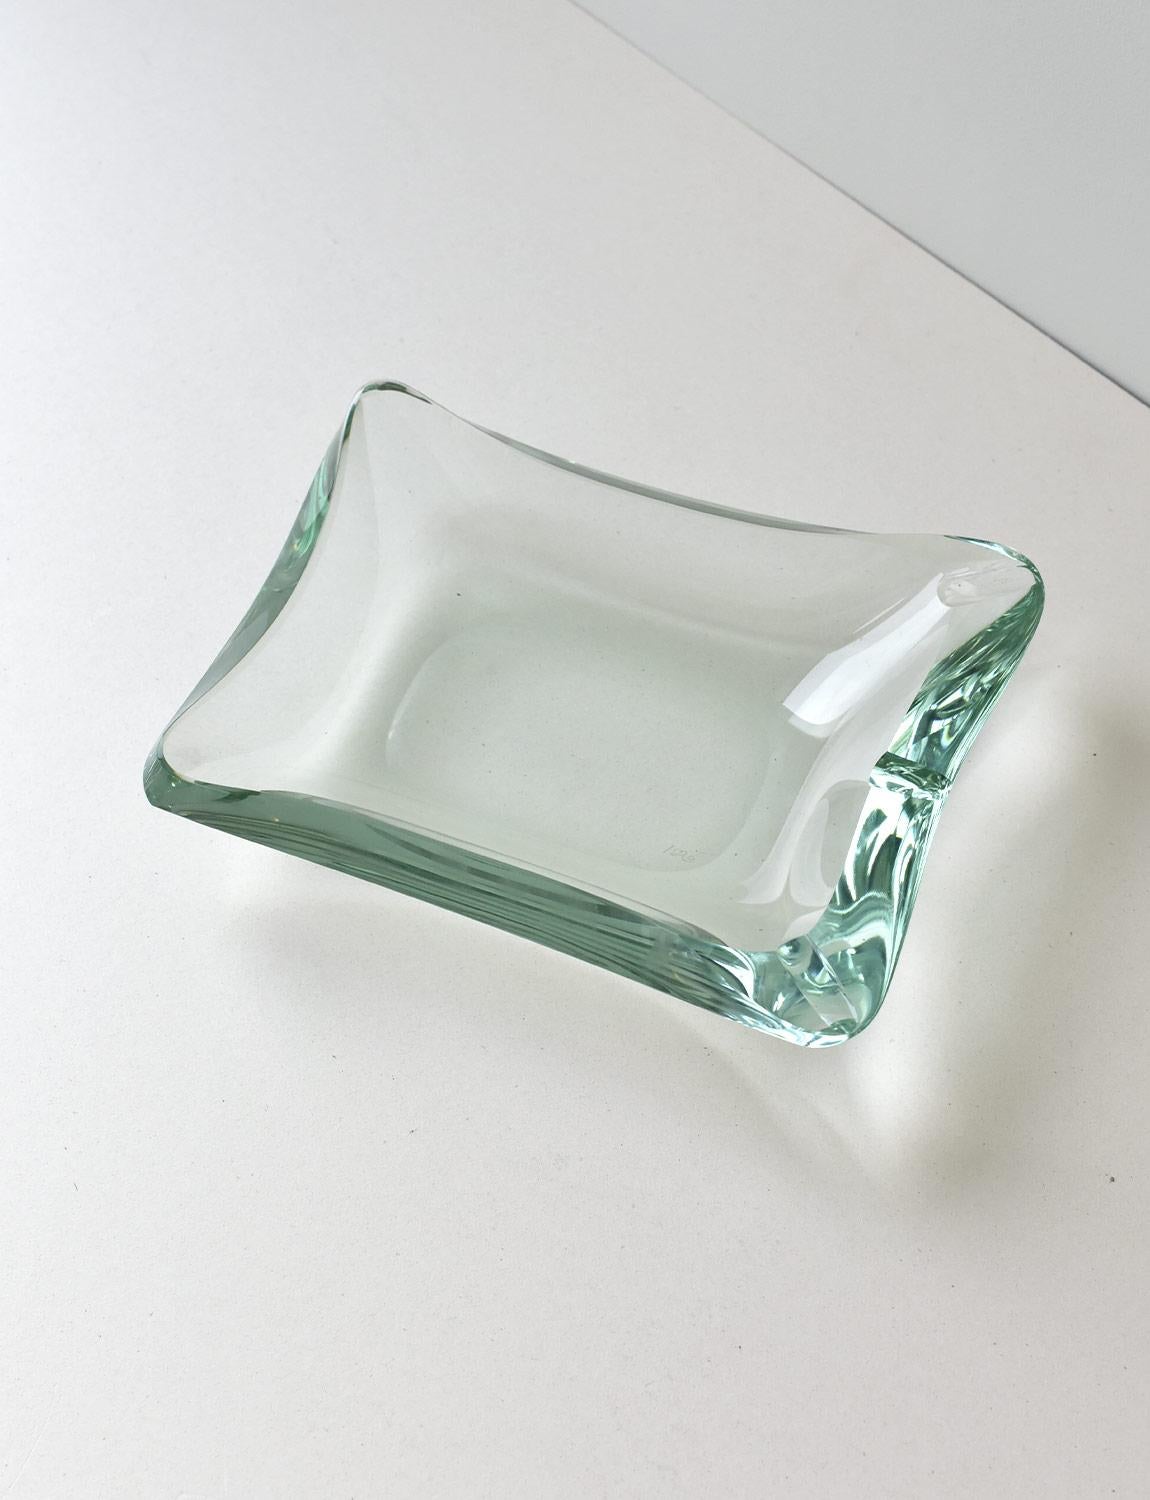 A very large 1940s pale green glass rectangular bowl which can be used as a 'tasca vuota' (empty pocket) or ashtray. The piece is signed on the base as per the photo. This very heavy handsome piece is on excellent condition, perfect for any coffee